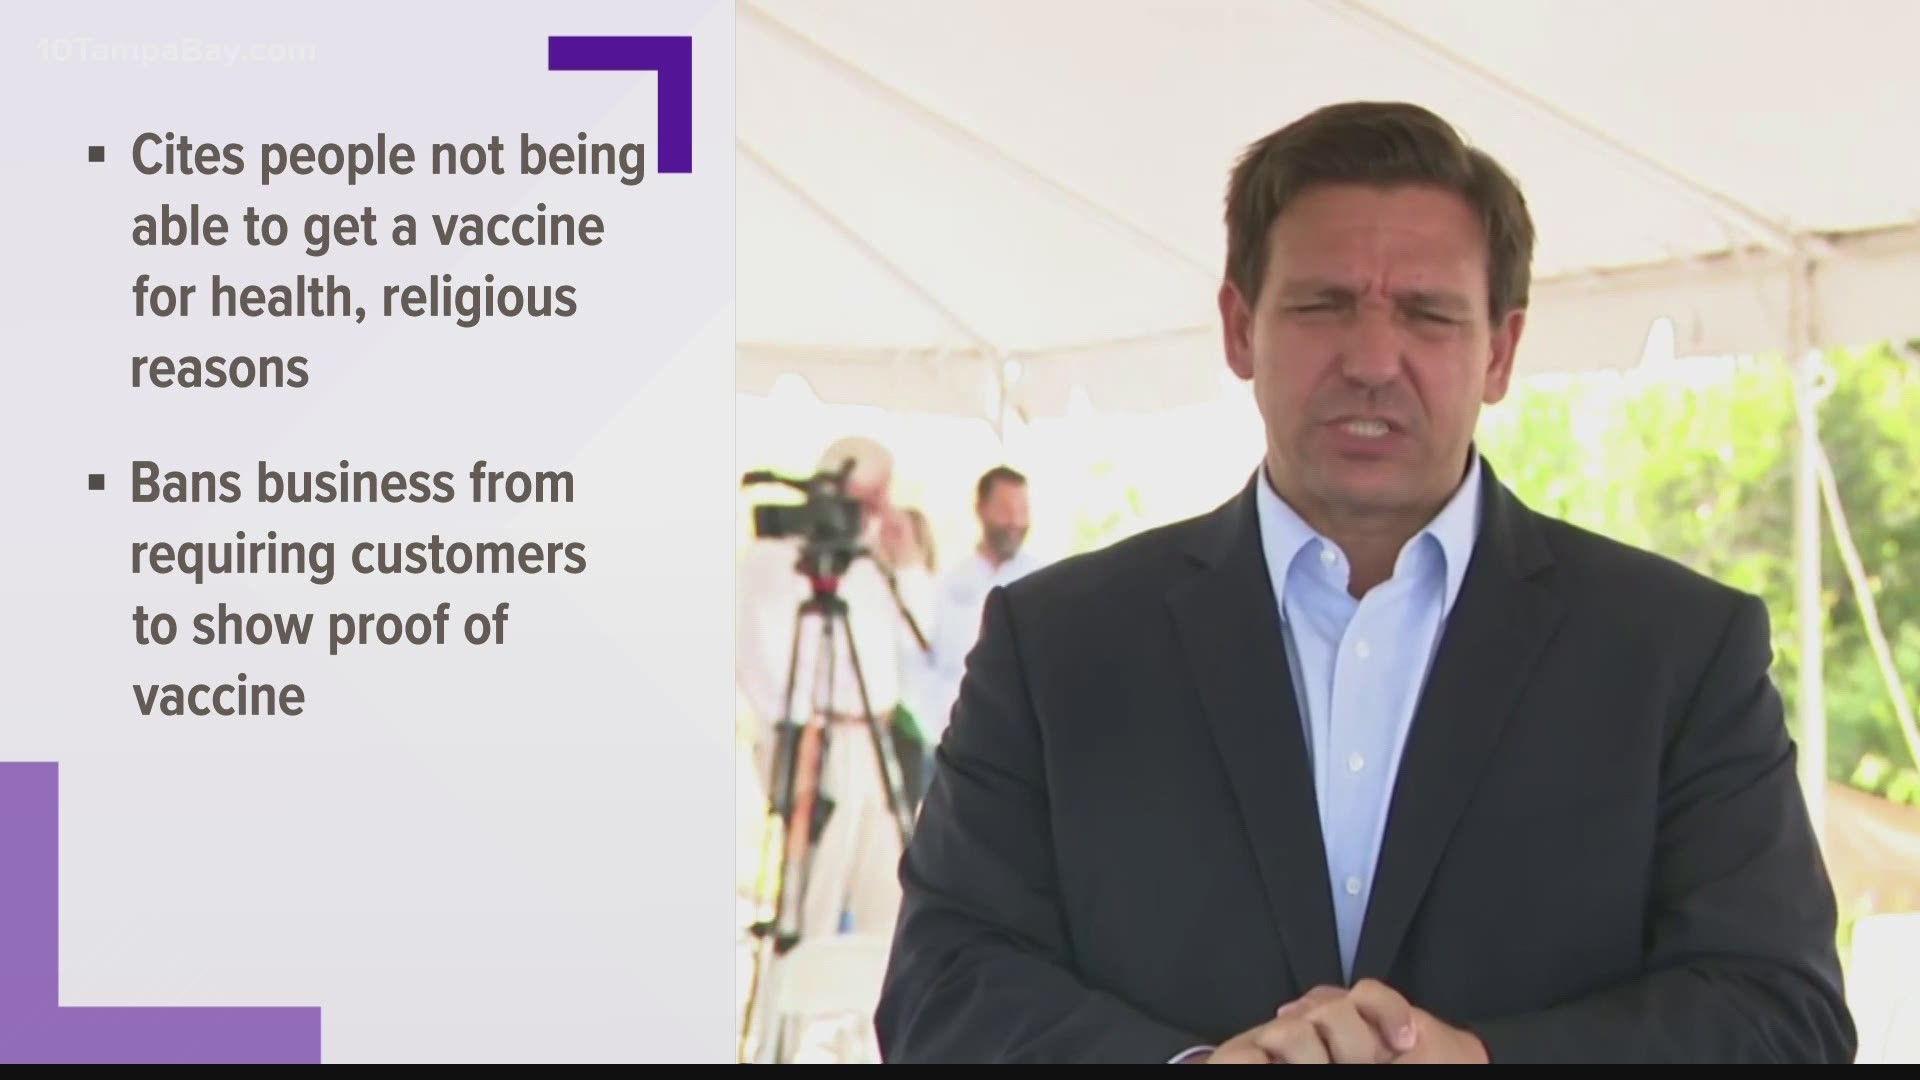 The governor's order says vaccine passports “will reduce individual freedom and will harm patient privacy.”